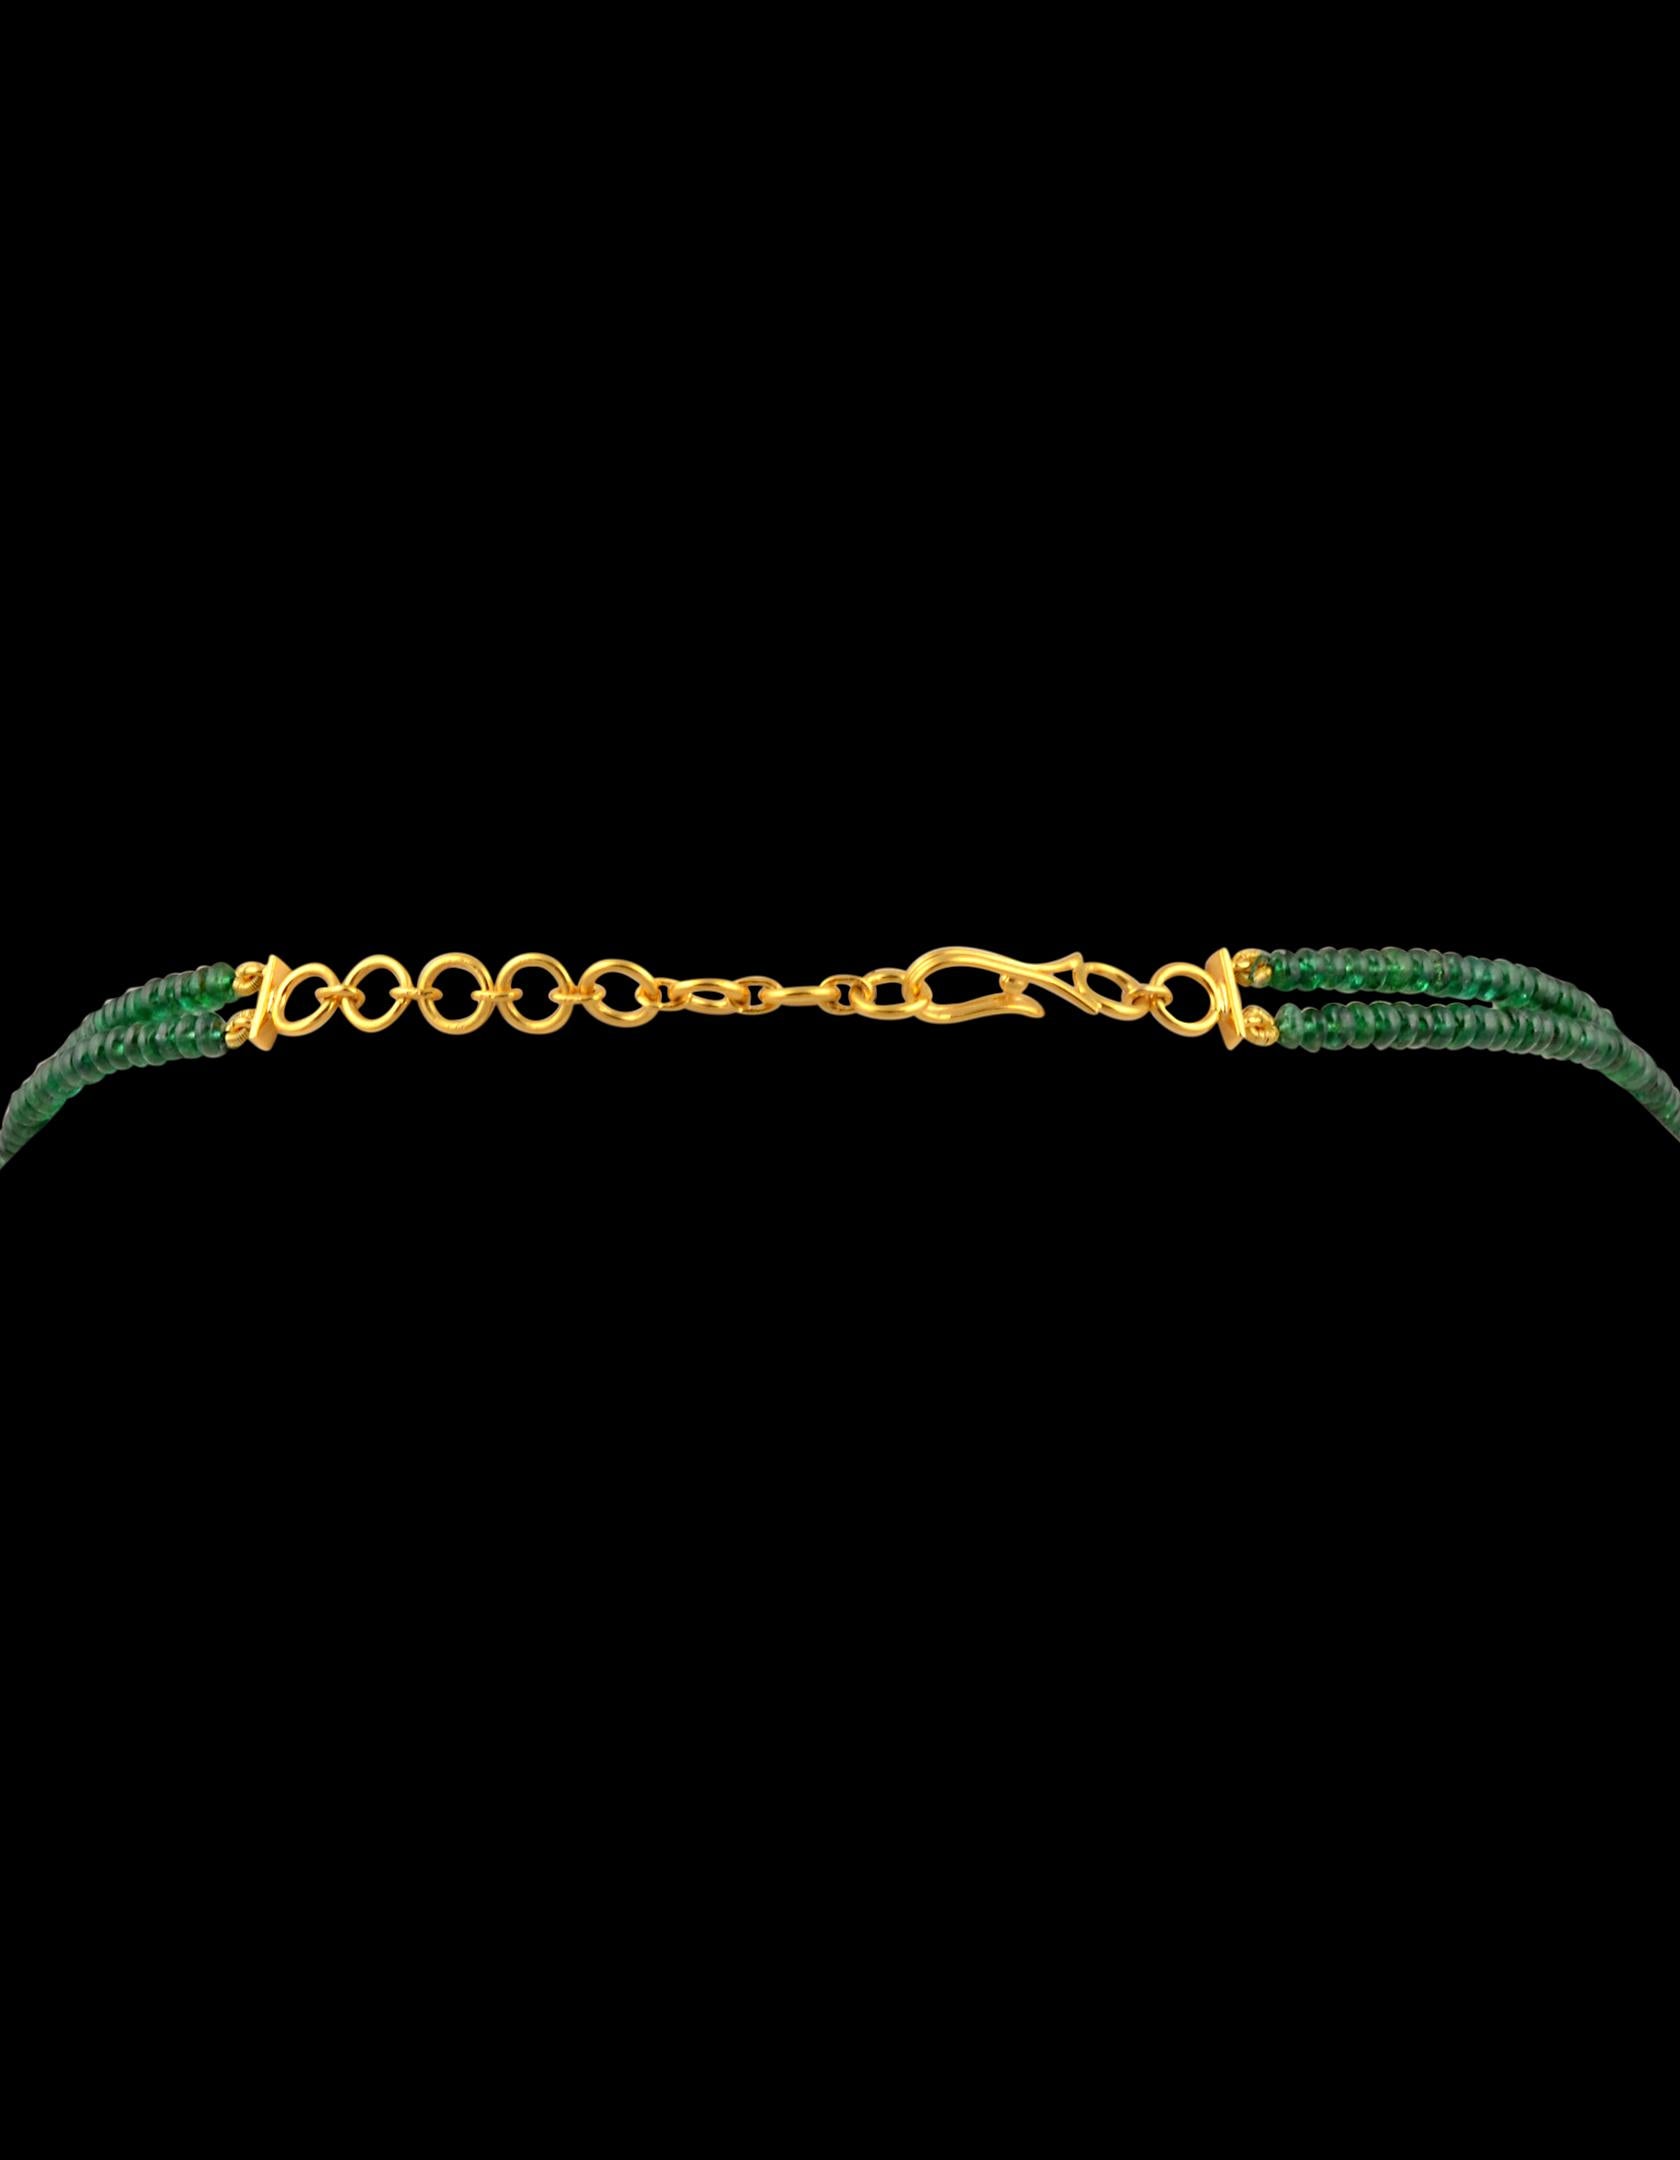 125ct Fine Emerald Beads 2 Line Necklace with 14 Kt Yellow Gold Clasp Adjustable 10